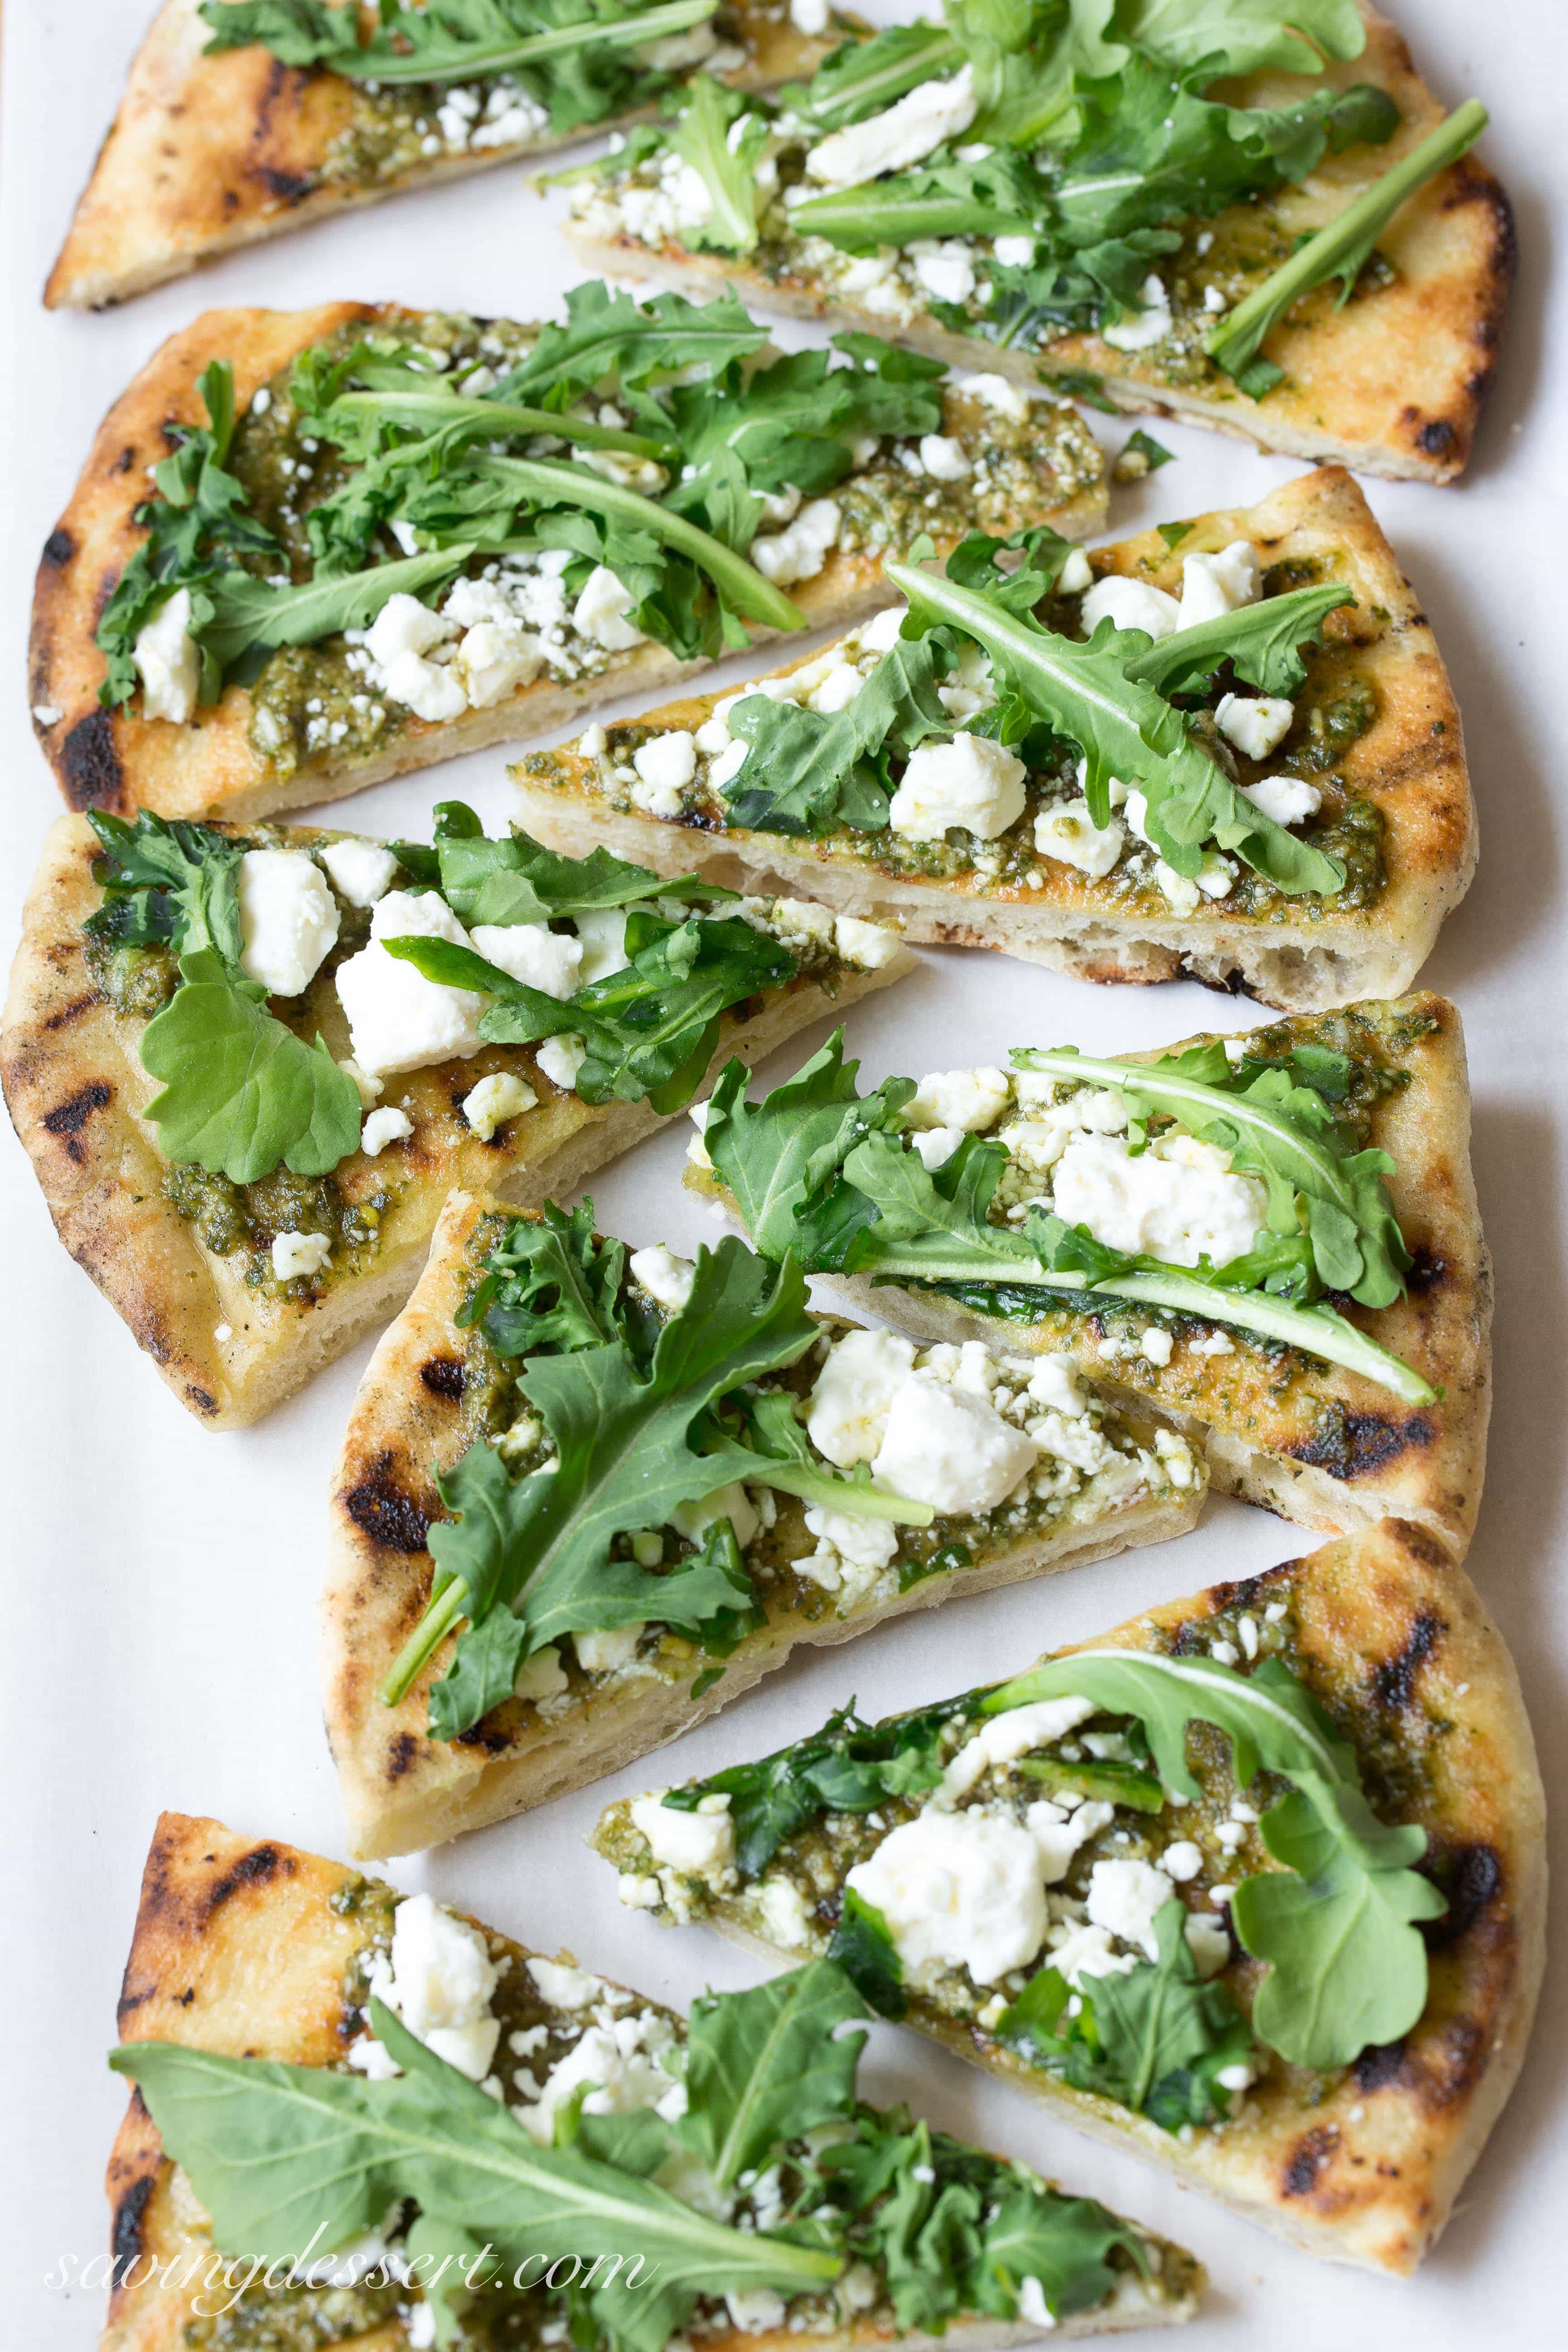 Grilled Pesto Pizza with Arugula and Feta - Saving Room for Dessert